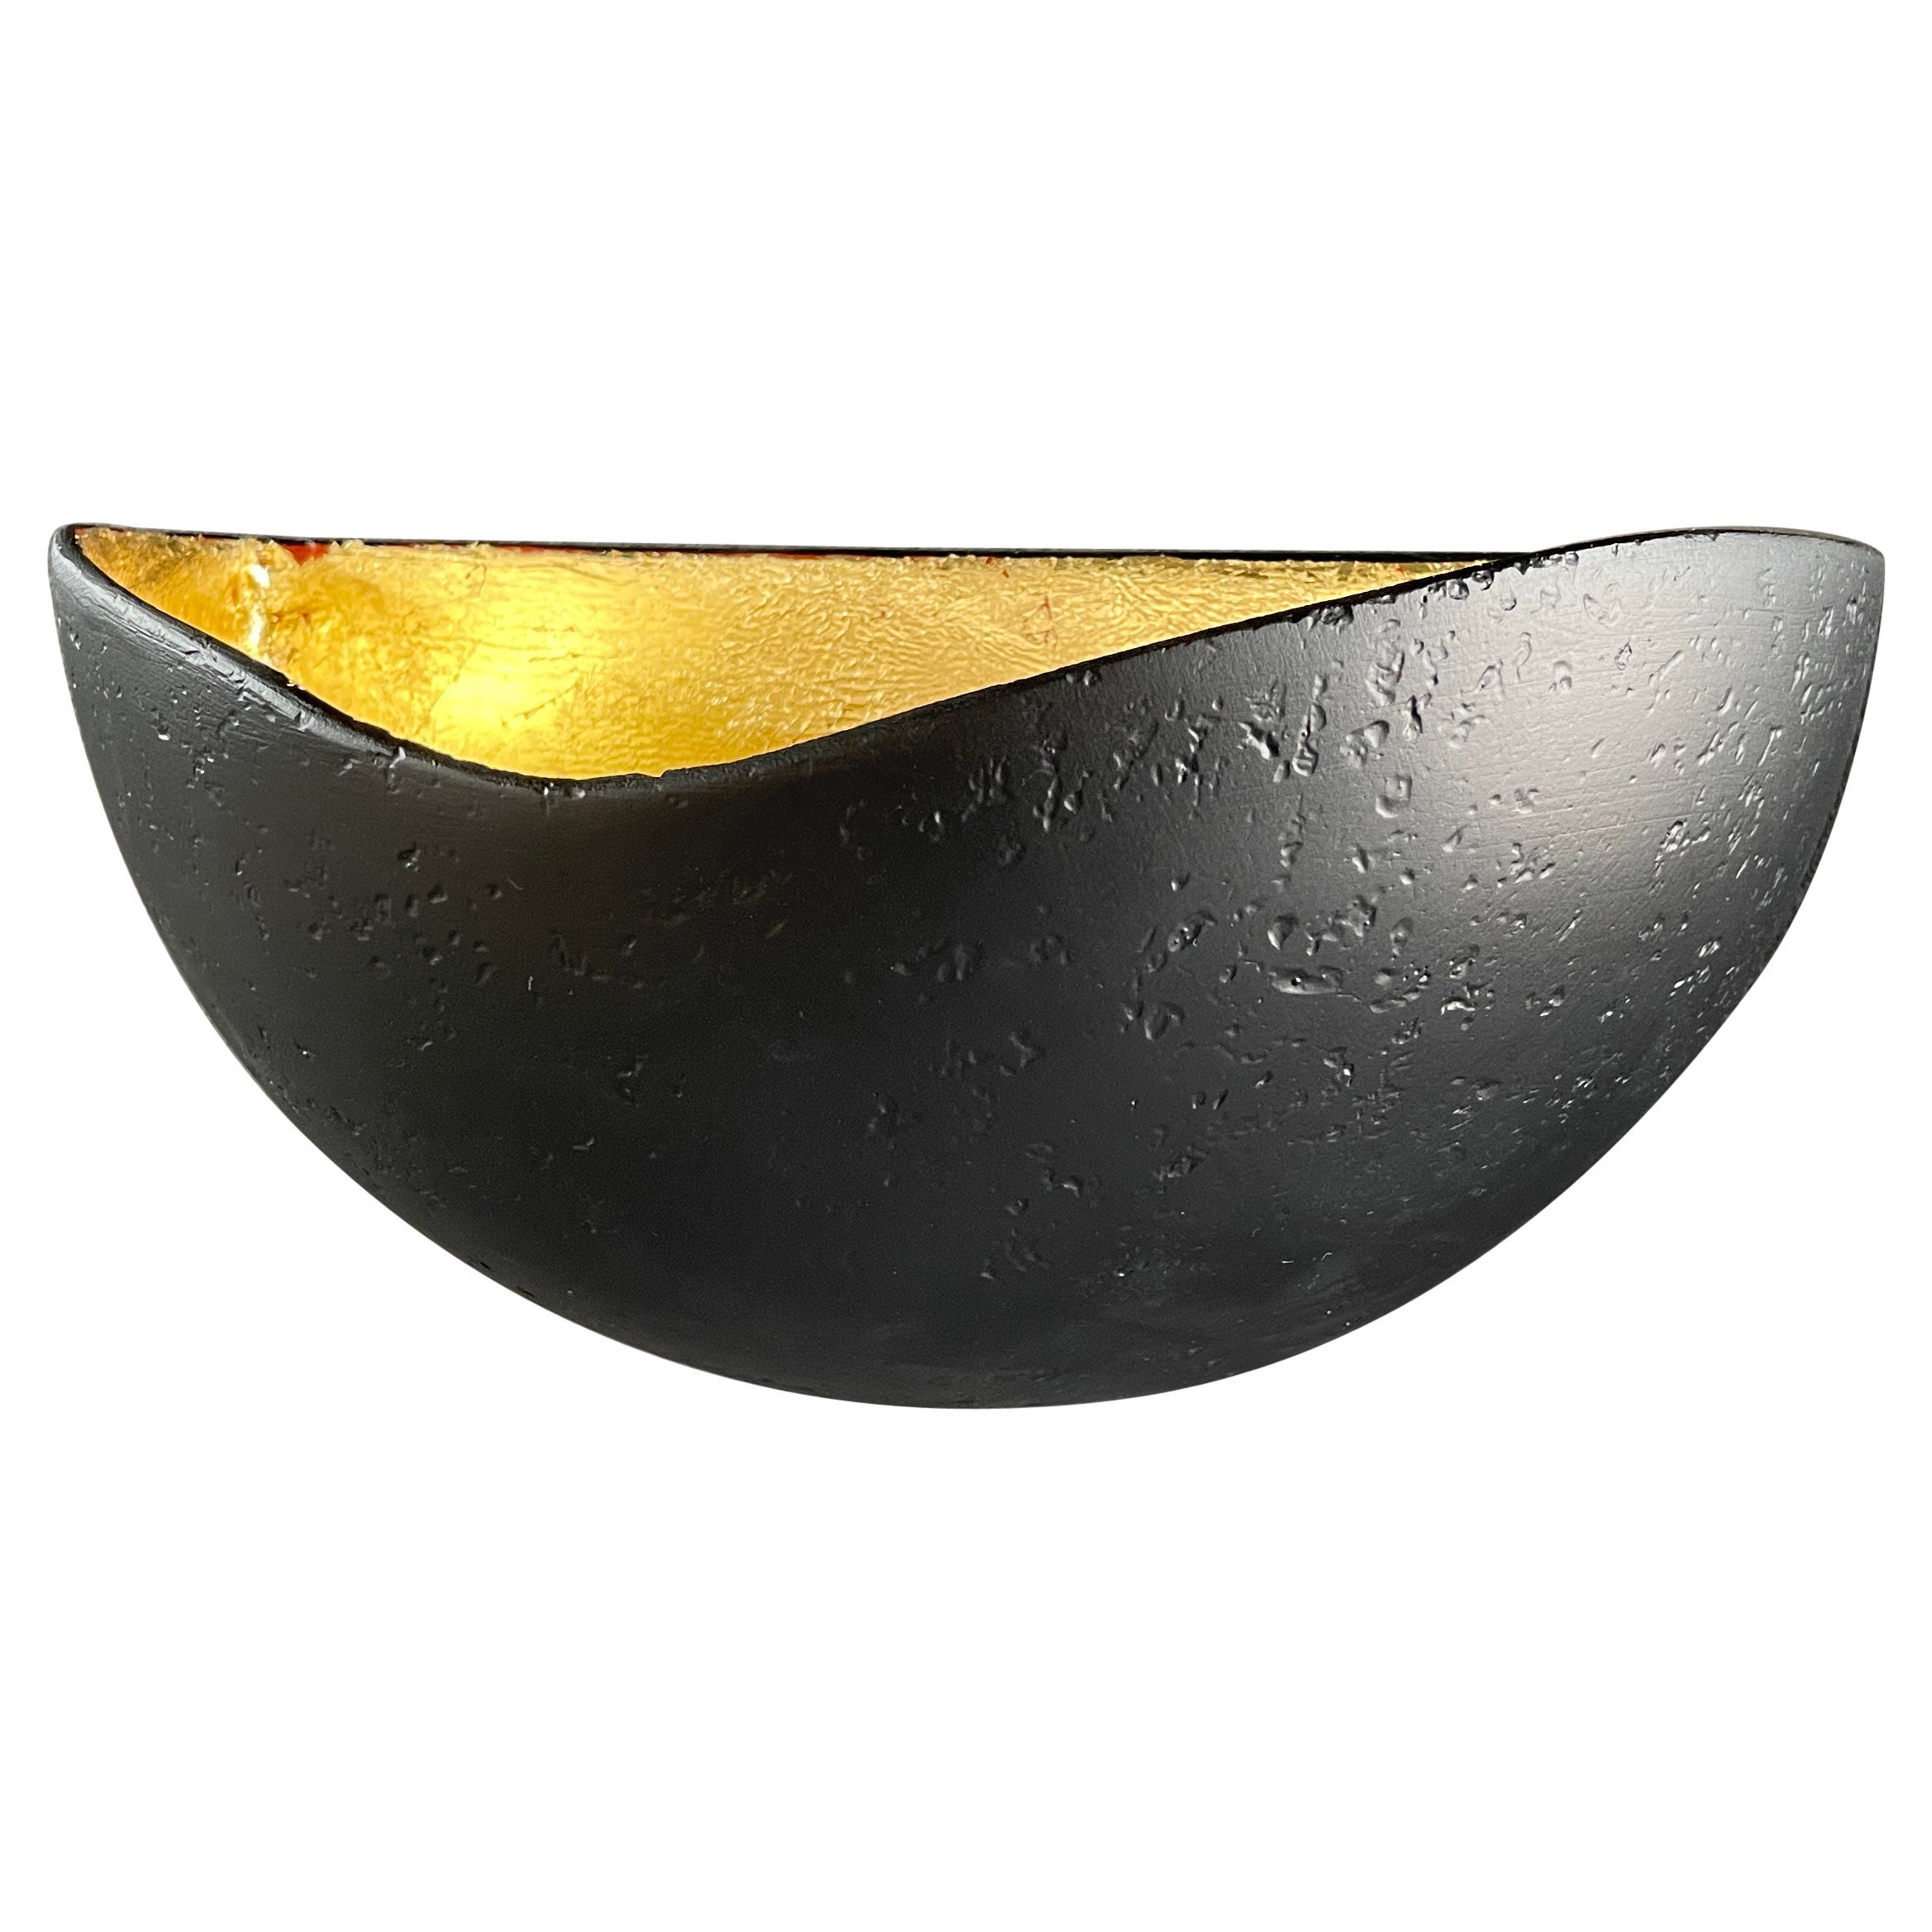 St Germain Sconce, Matte Black with Gold Leaf, by Bourgeois Boheme Atelier For Sale